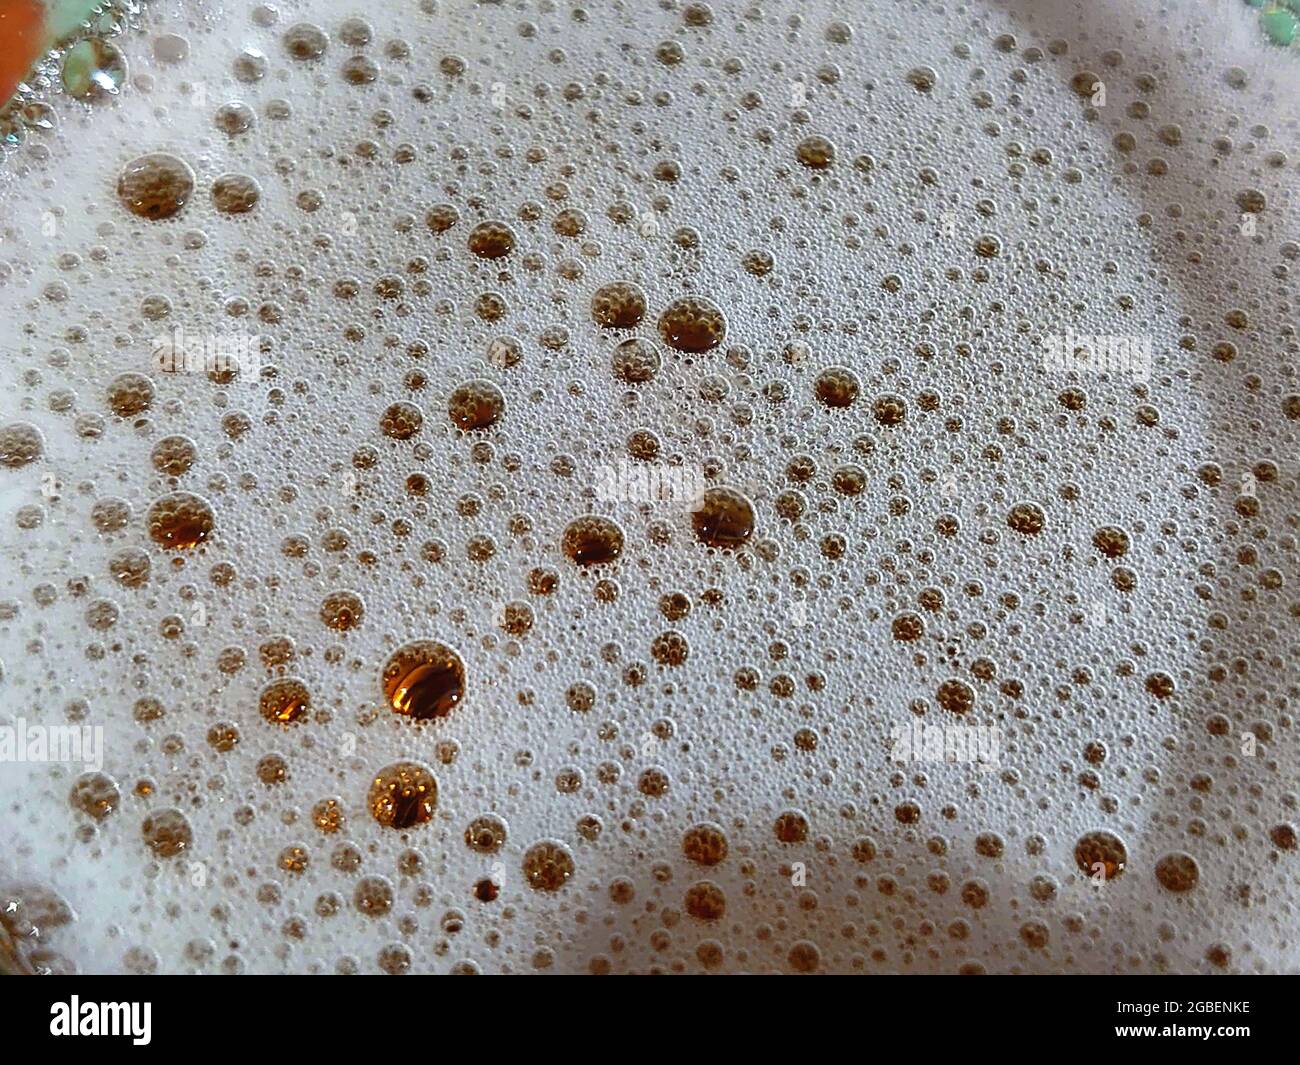 air bubbles in a glass of beer. Stock Photo